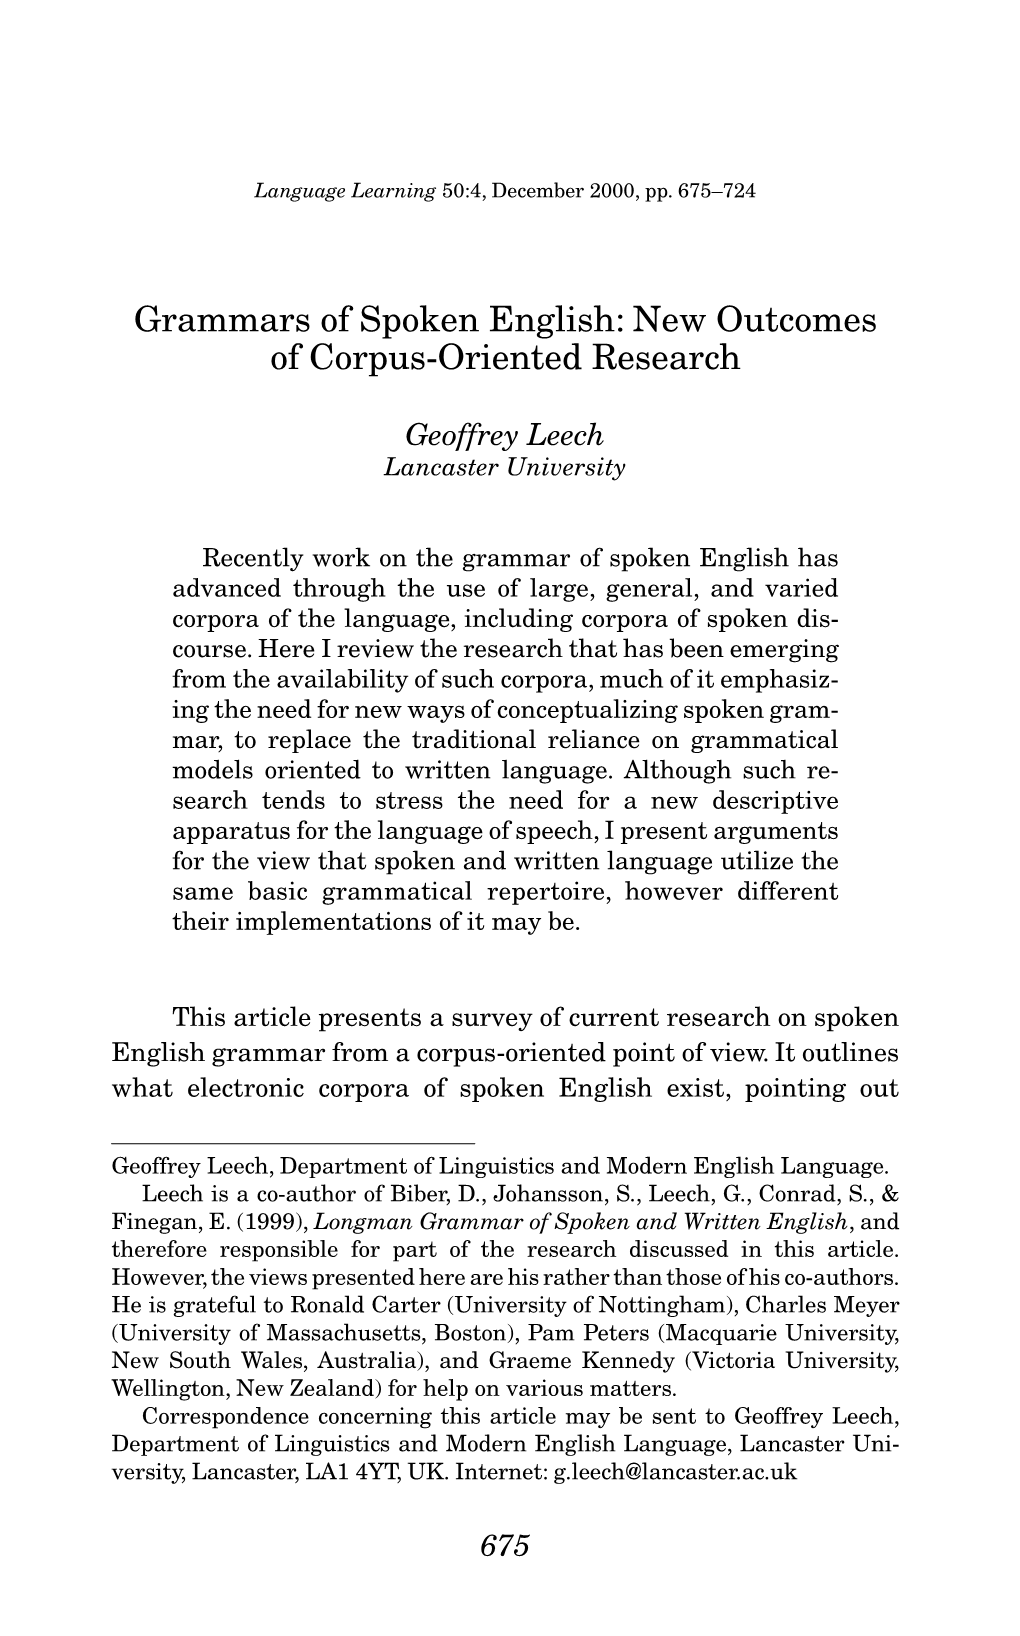 Grammars of Spoken English: New Outcomes of Corpus-Oriented Research